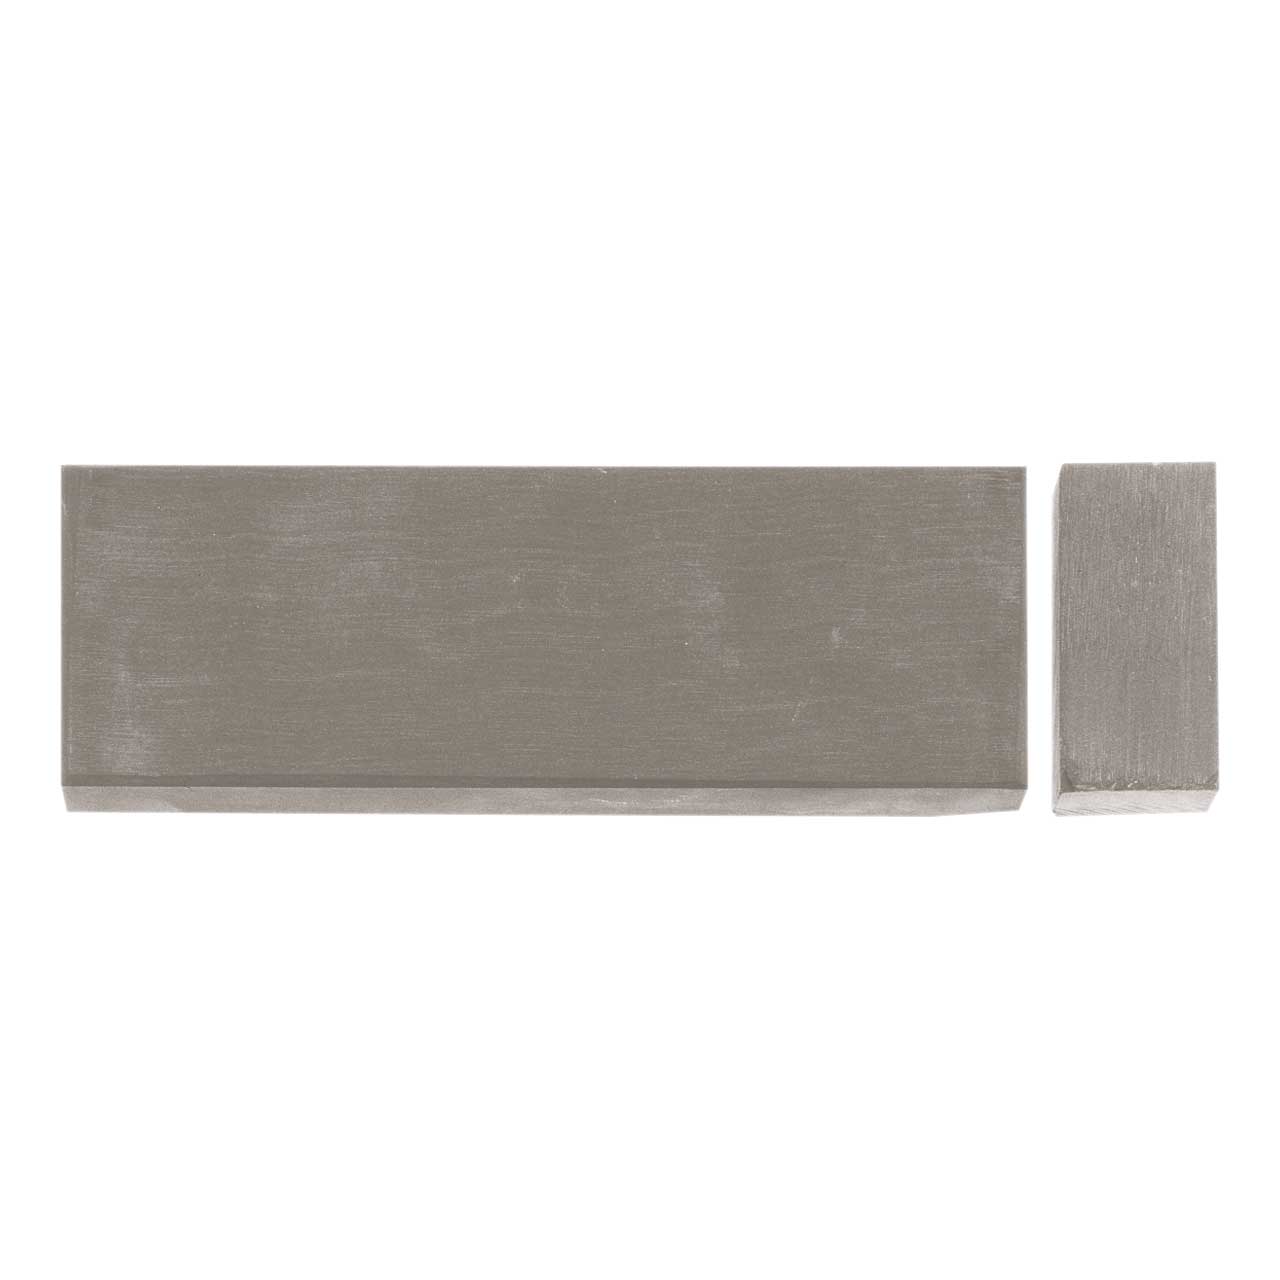 Picture of Herbertz - Water Sharpening Stone 18 x 5 cm Finest Grit with Flattening Stone